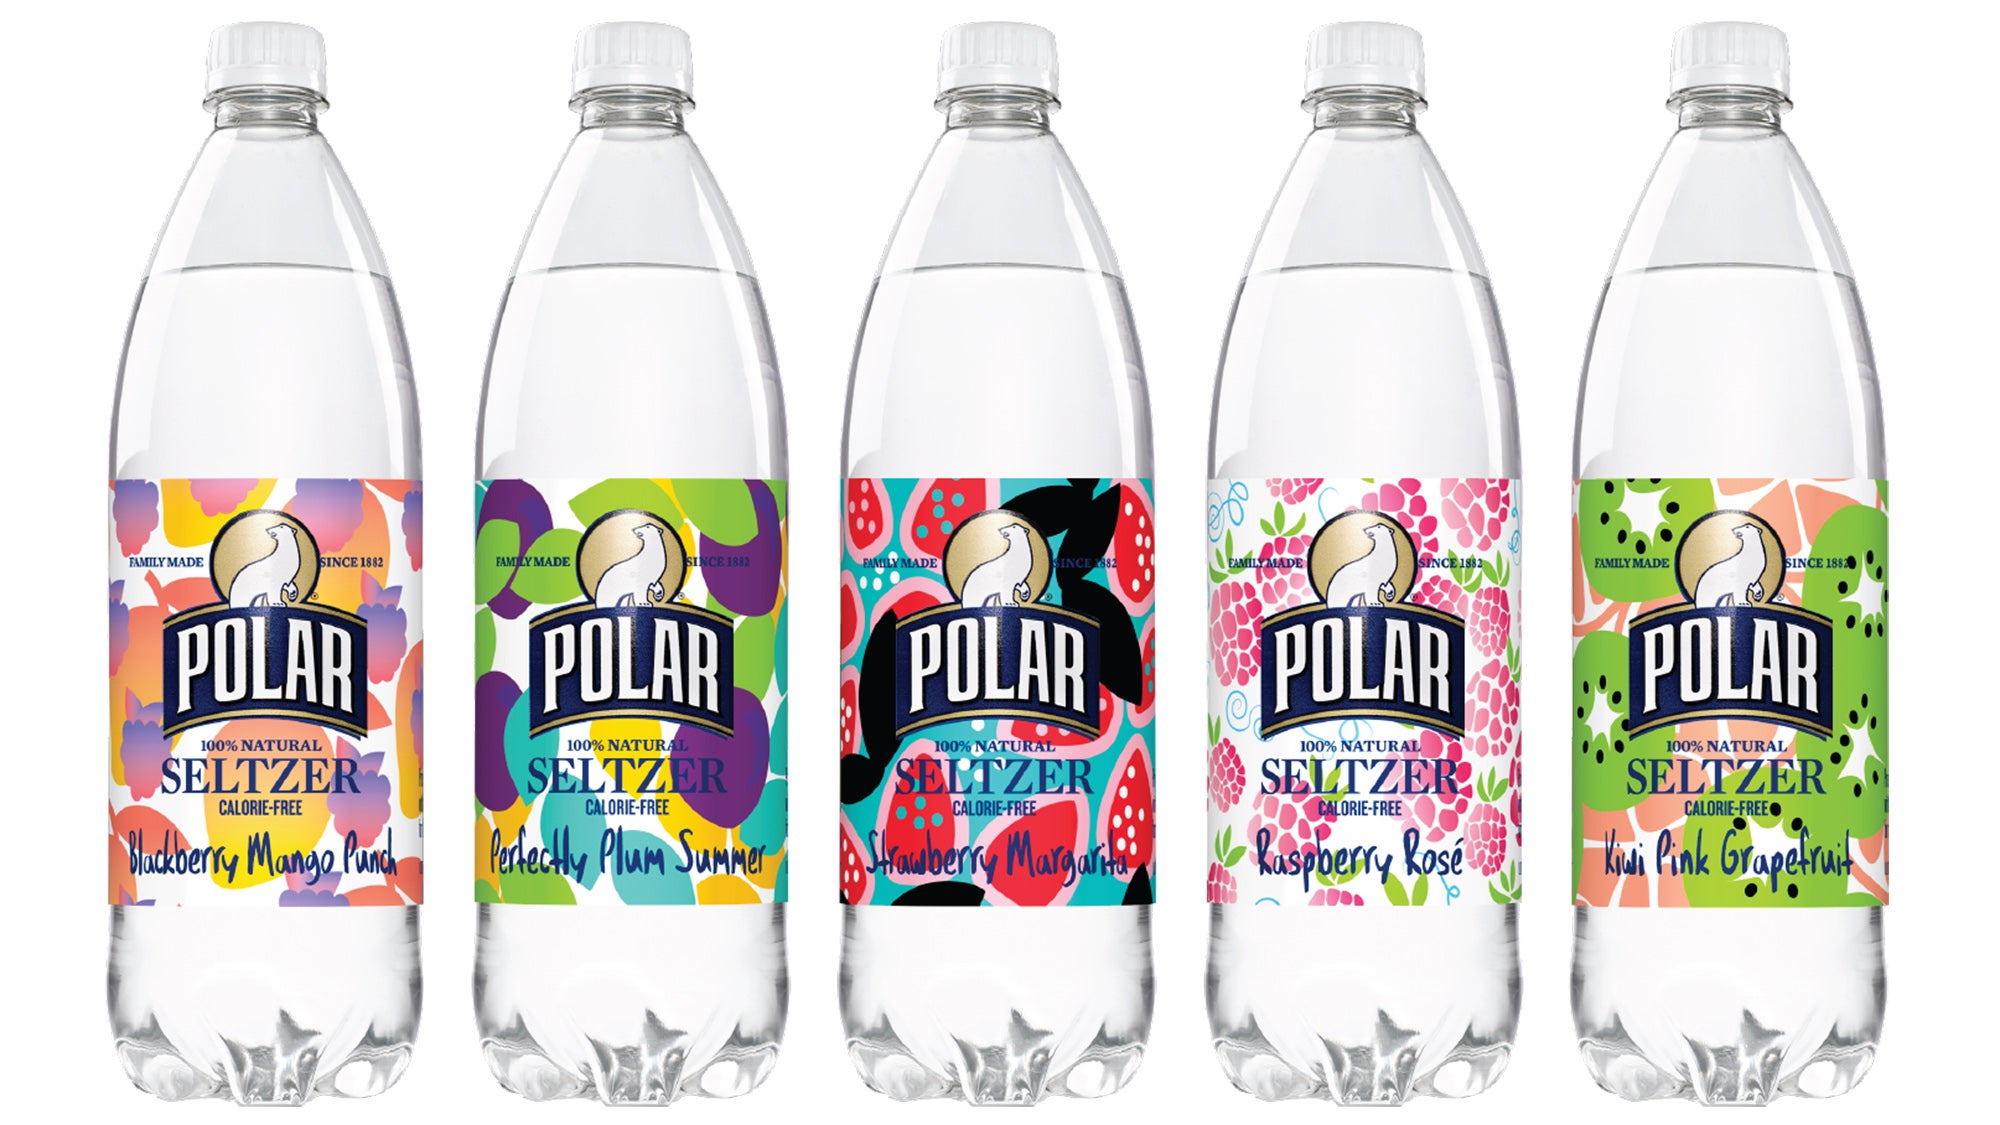 Polar Seltzer's 2020 summer flavors are out